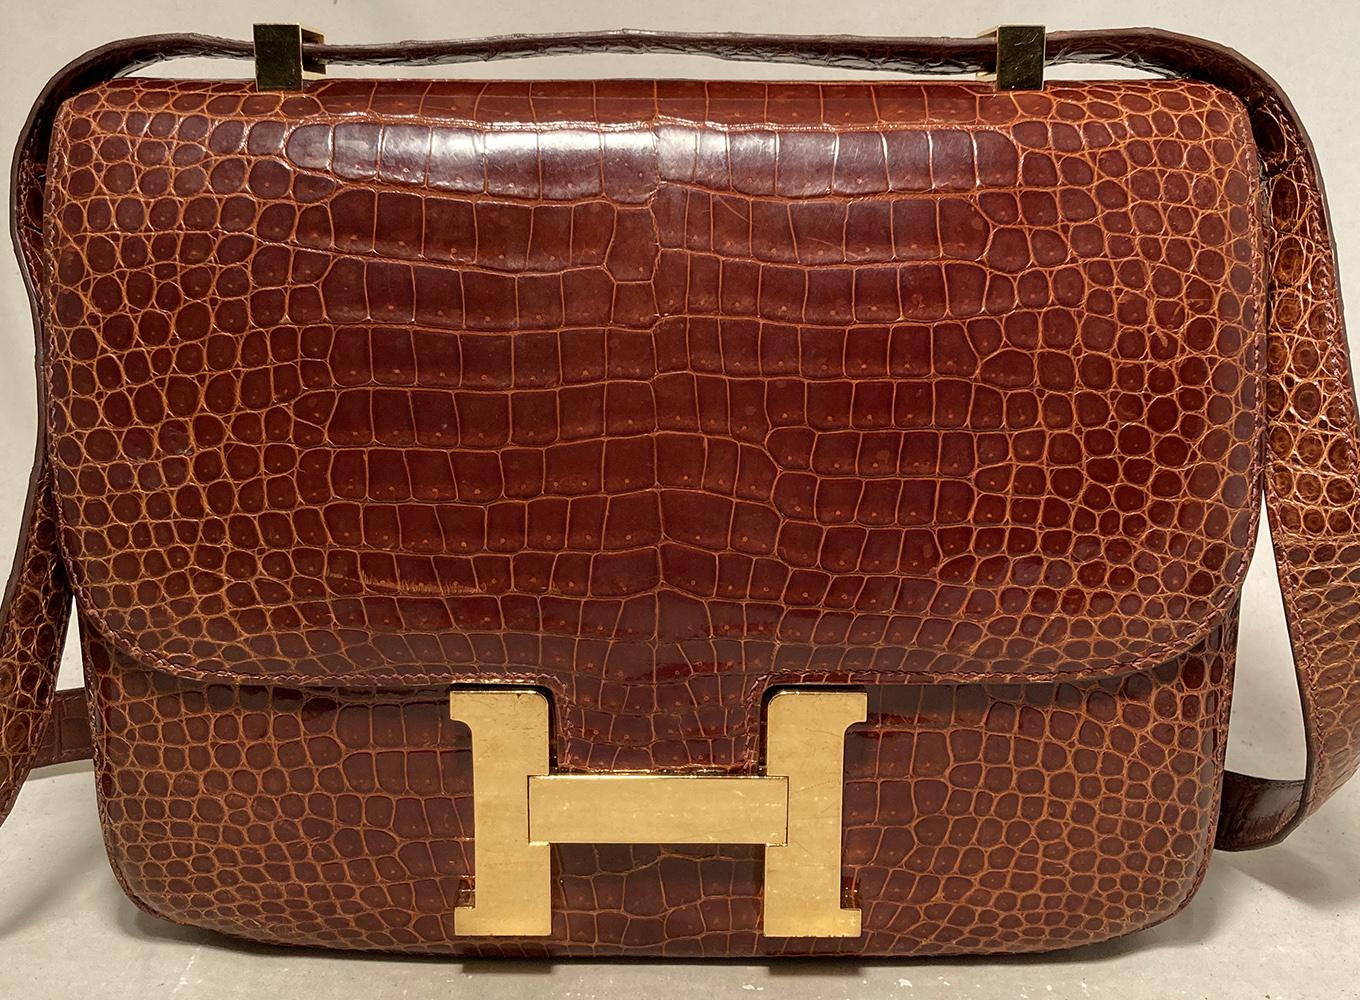 RARE Hermes Brown Crocodile Constance Bag in very good condition. Cognac brown crocodile leather exterior trimmed with matching crocodile leather shoulder strap and gold H hardware along front side. Back side exterior slit pocket. Magnetic lift flap